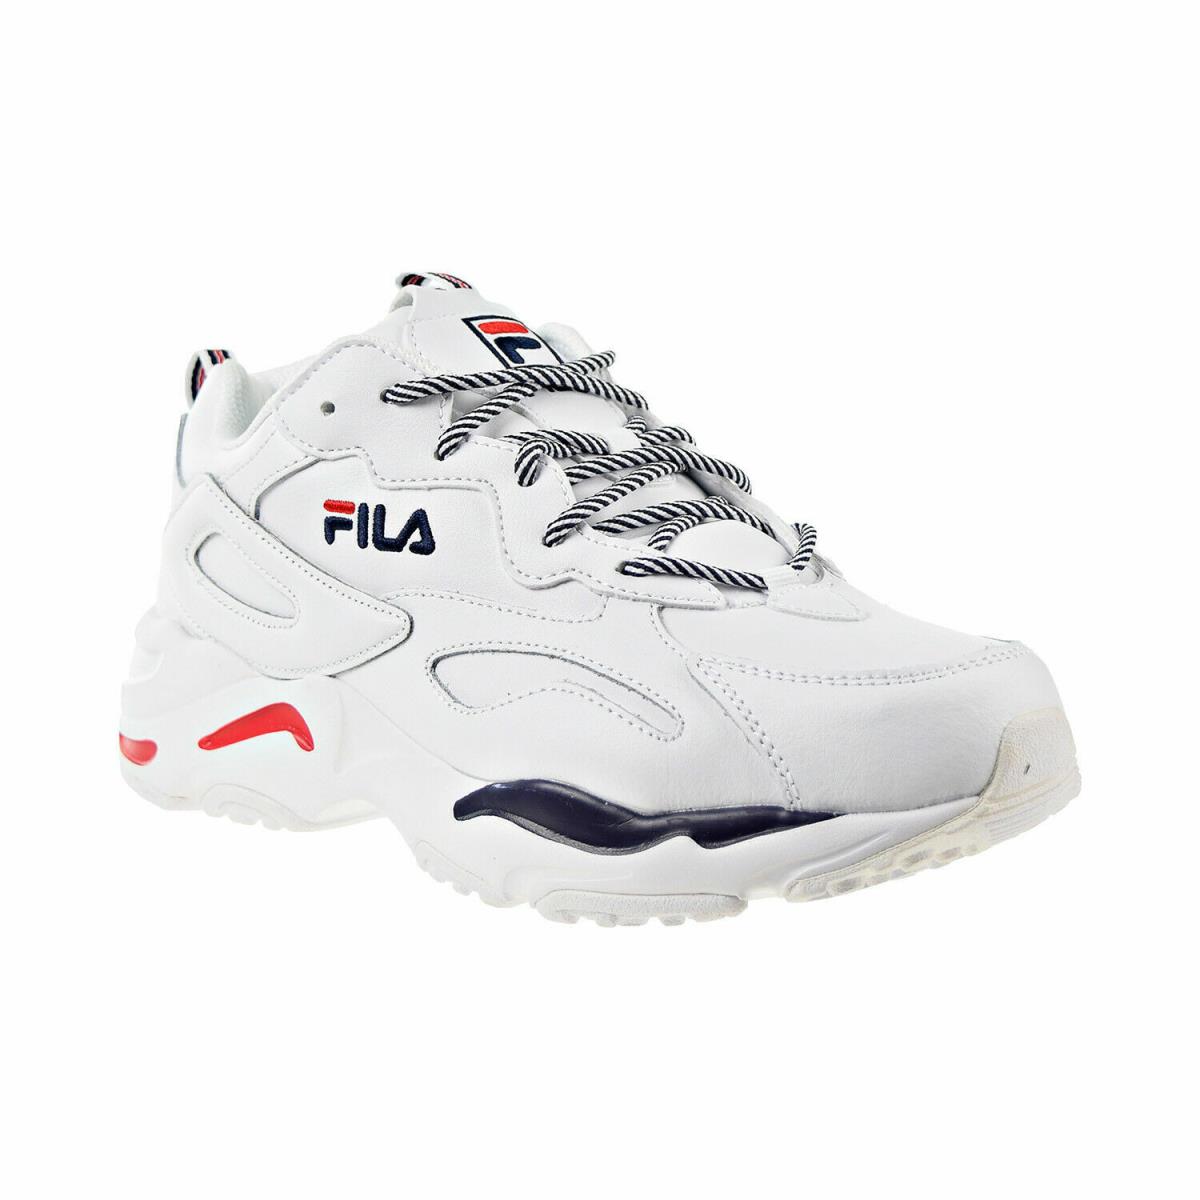 Fila Men`s Ray Tracer Sneaker Shoes 1RM00661-125 White/navy/red